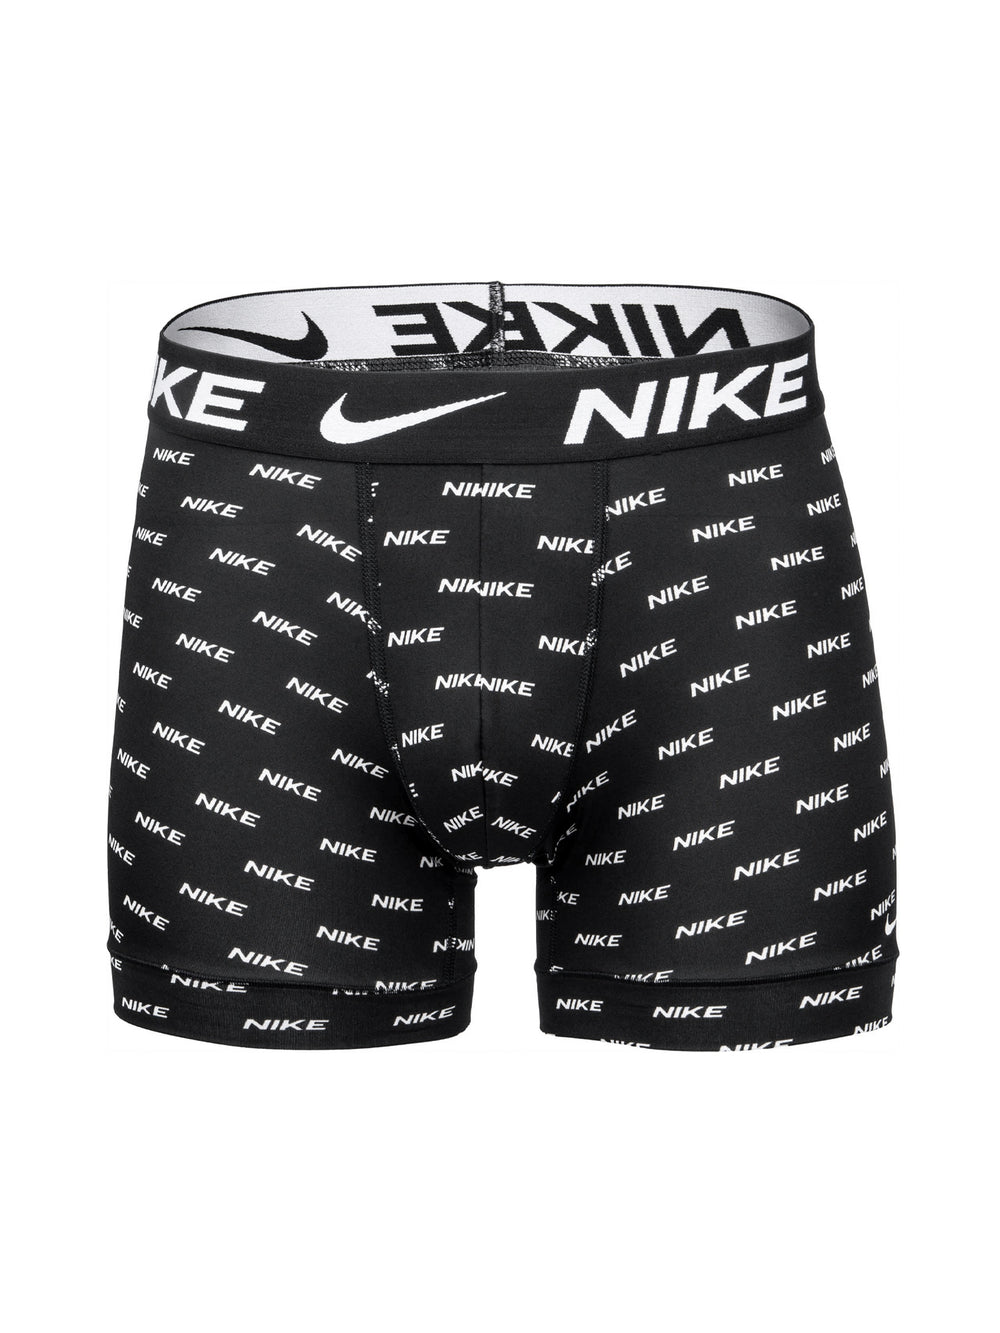 NIKE ALL OVER PRINT BOXER BRIEF 5" 3 PACK MWB